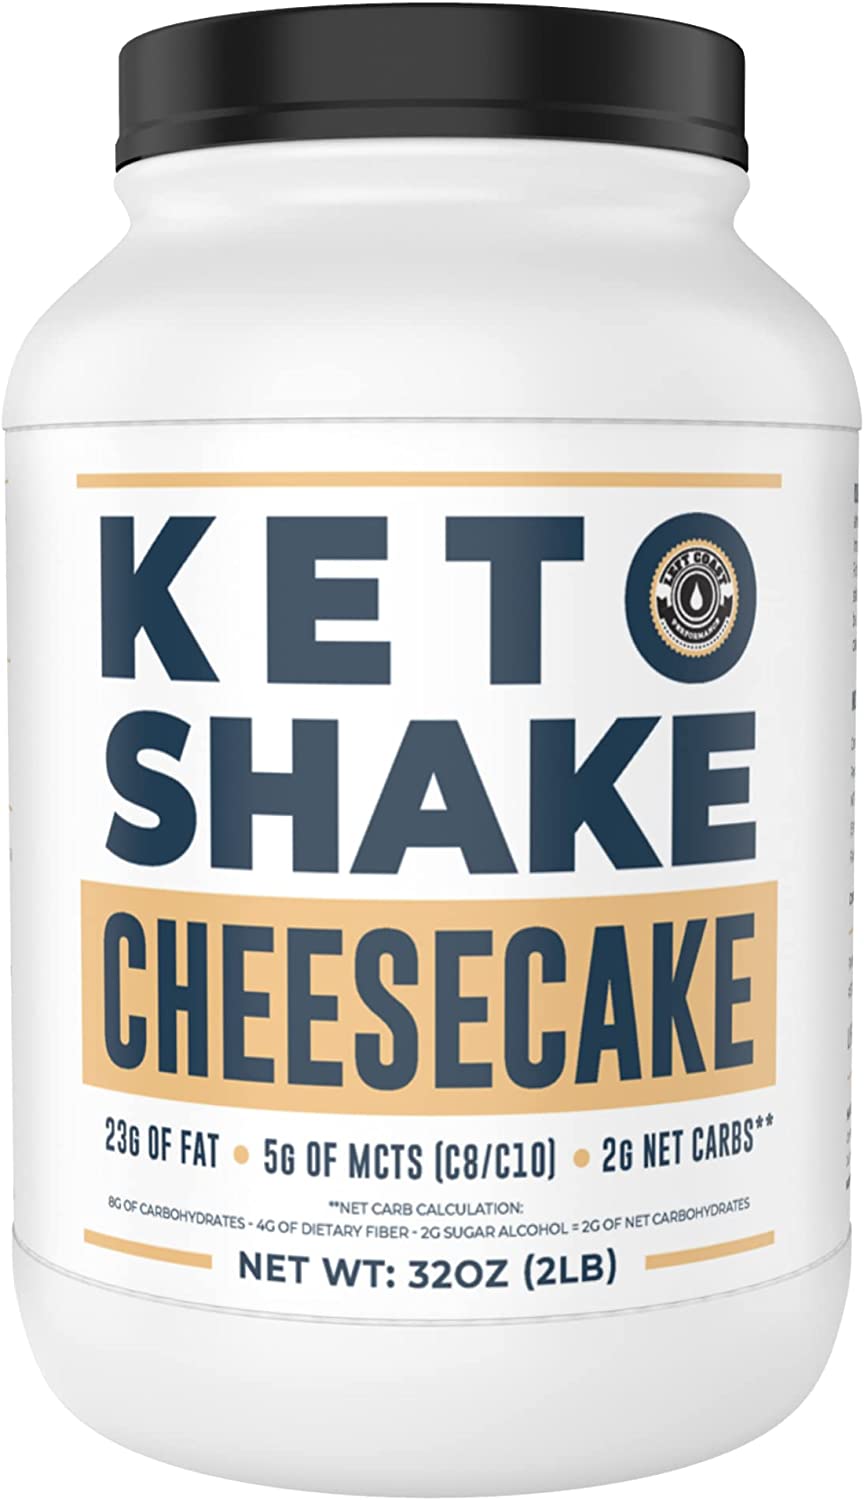 Cheesecake Keto Meal Replacement Shake 2lb